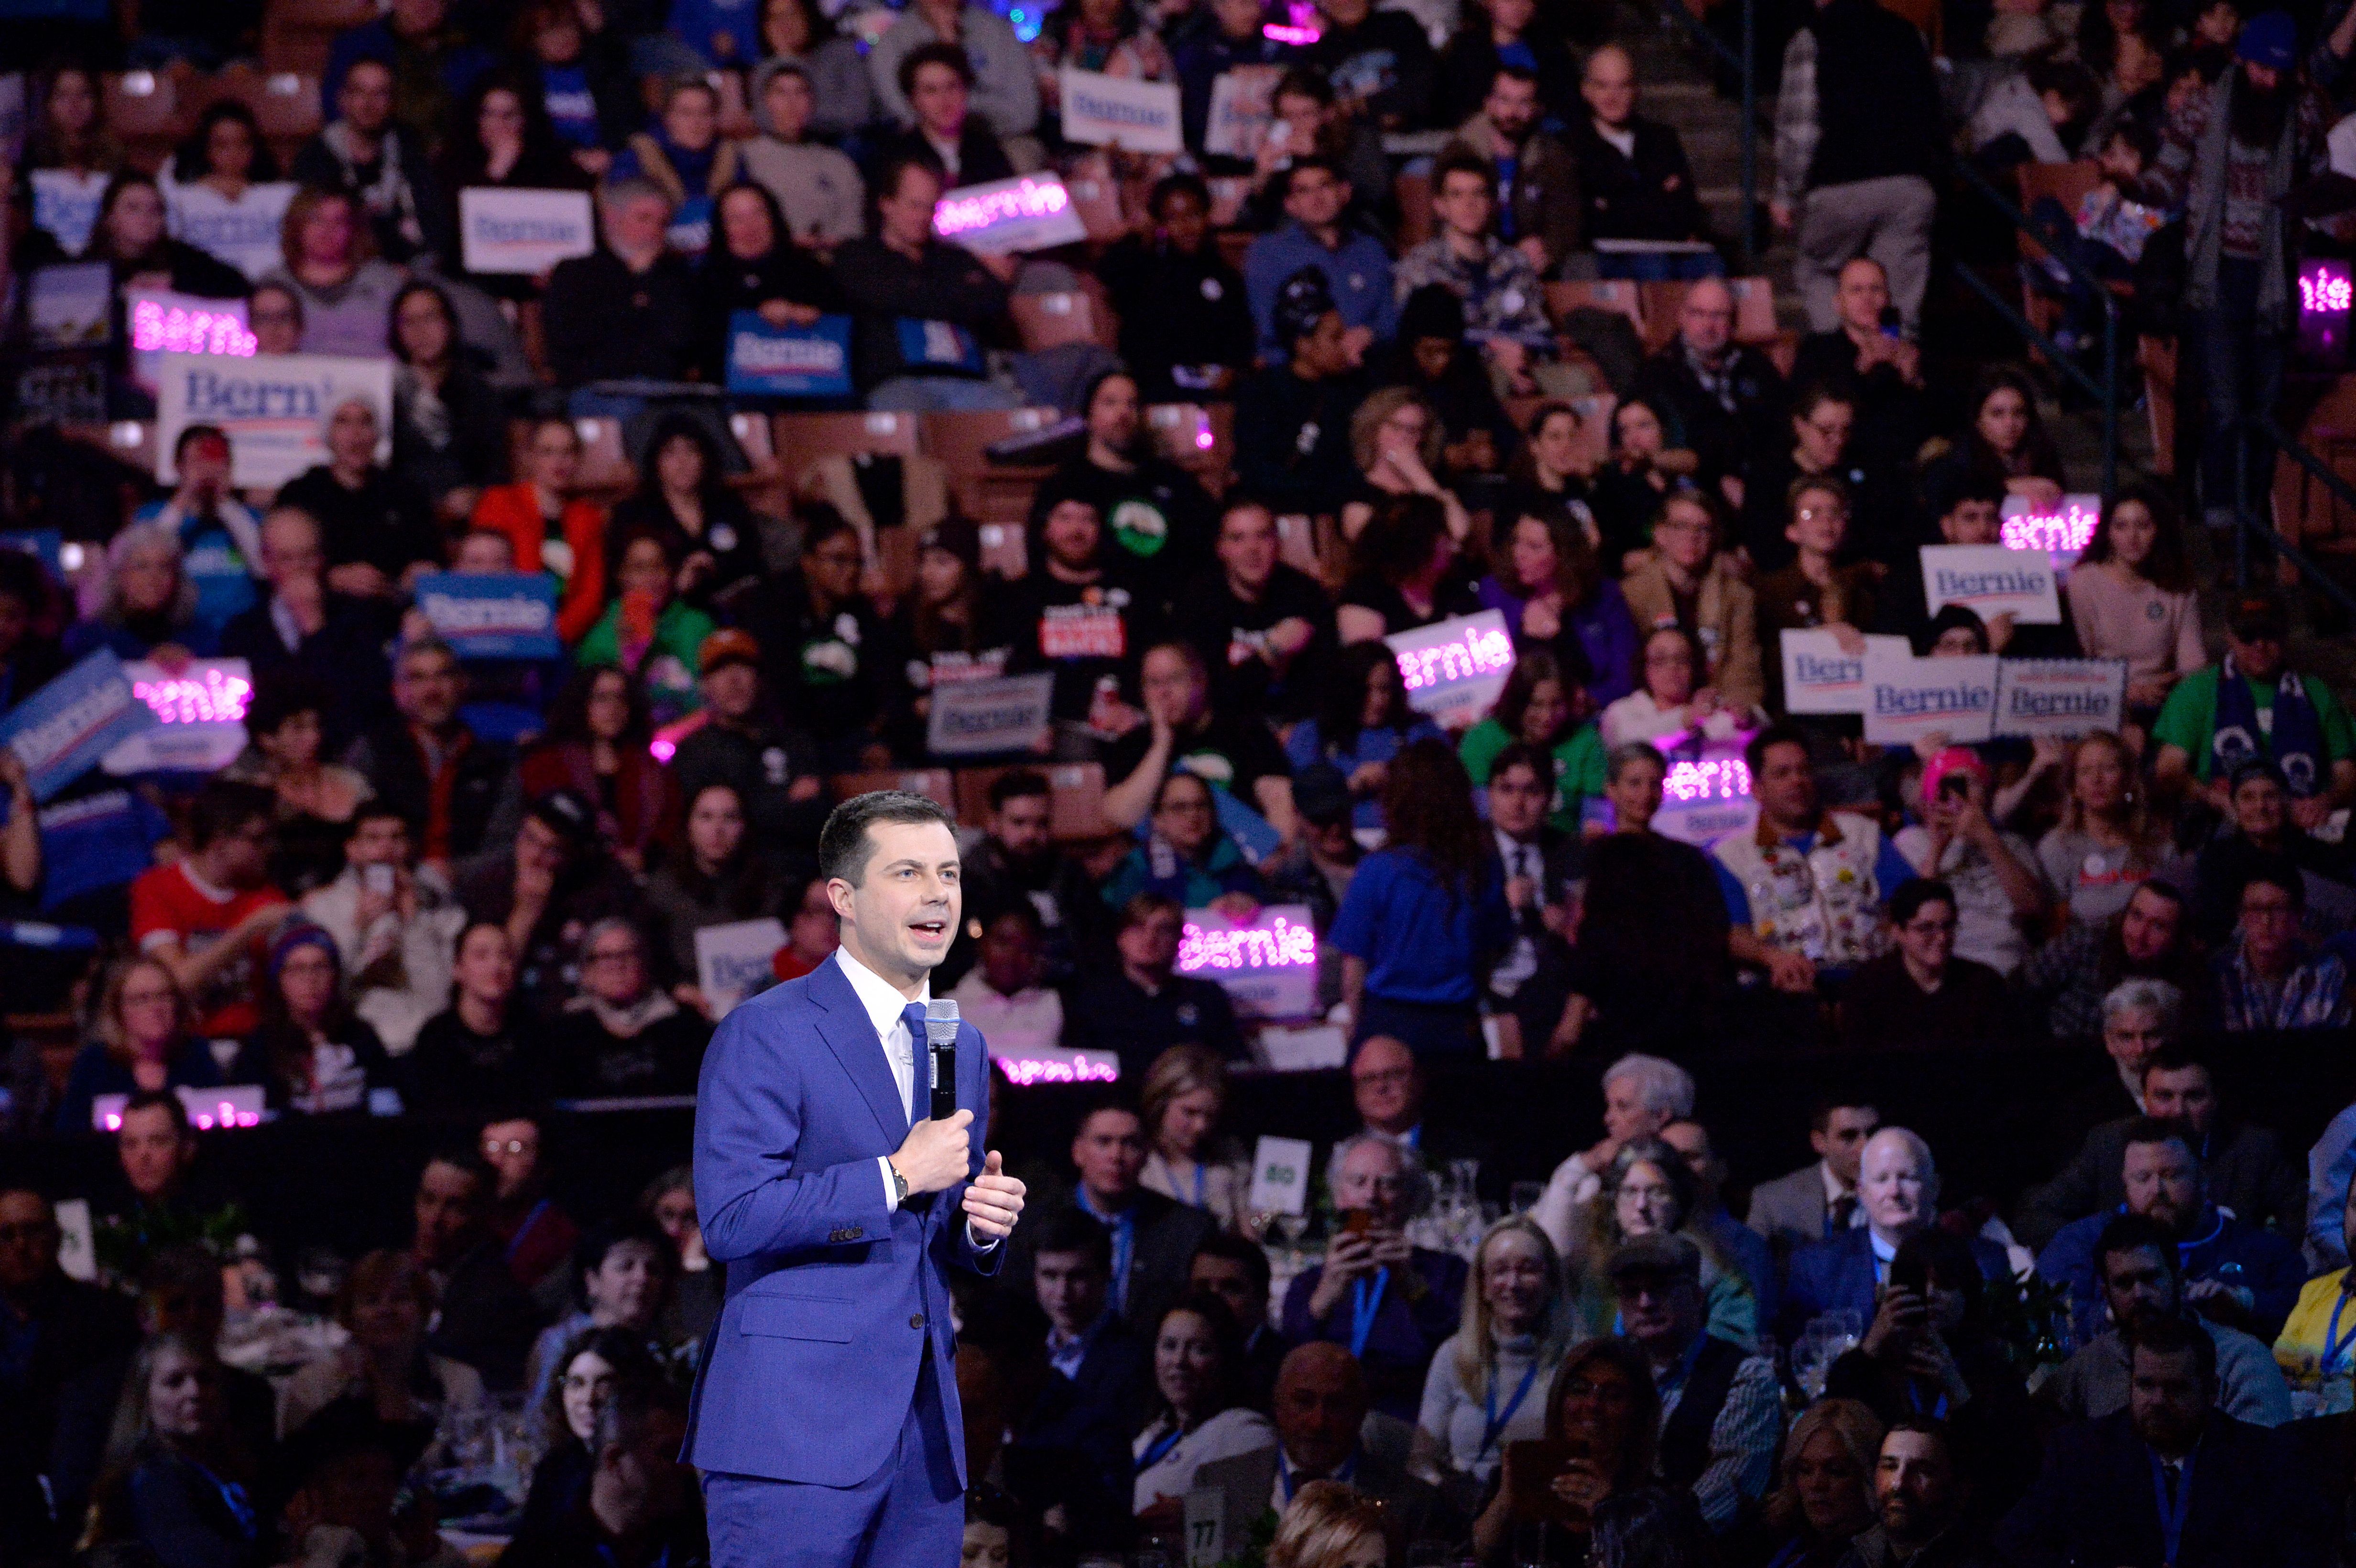 ormer Mayor of South Bend, Indiana, Pete Buttigieg addresses the Democratic Party's 61st Annual McIntyre-Shaheen 100 Club dinner at SNHU arena in Manchester, New Hampshire, on February 8